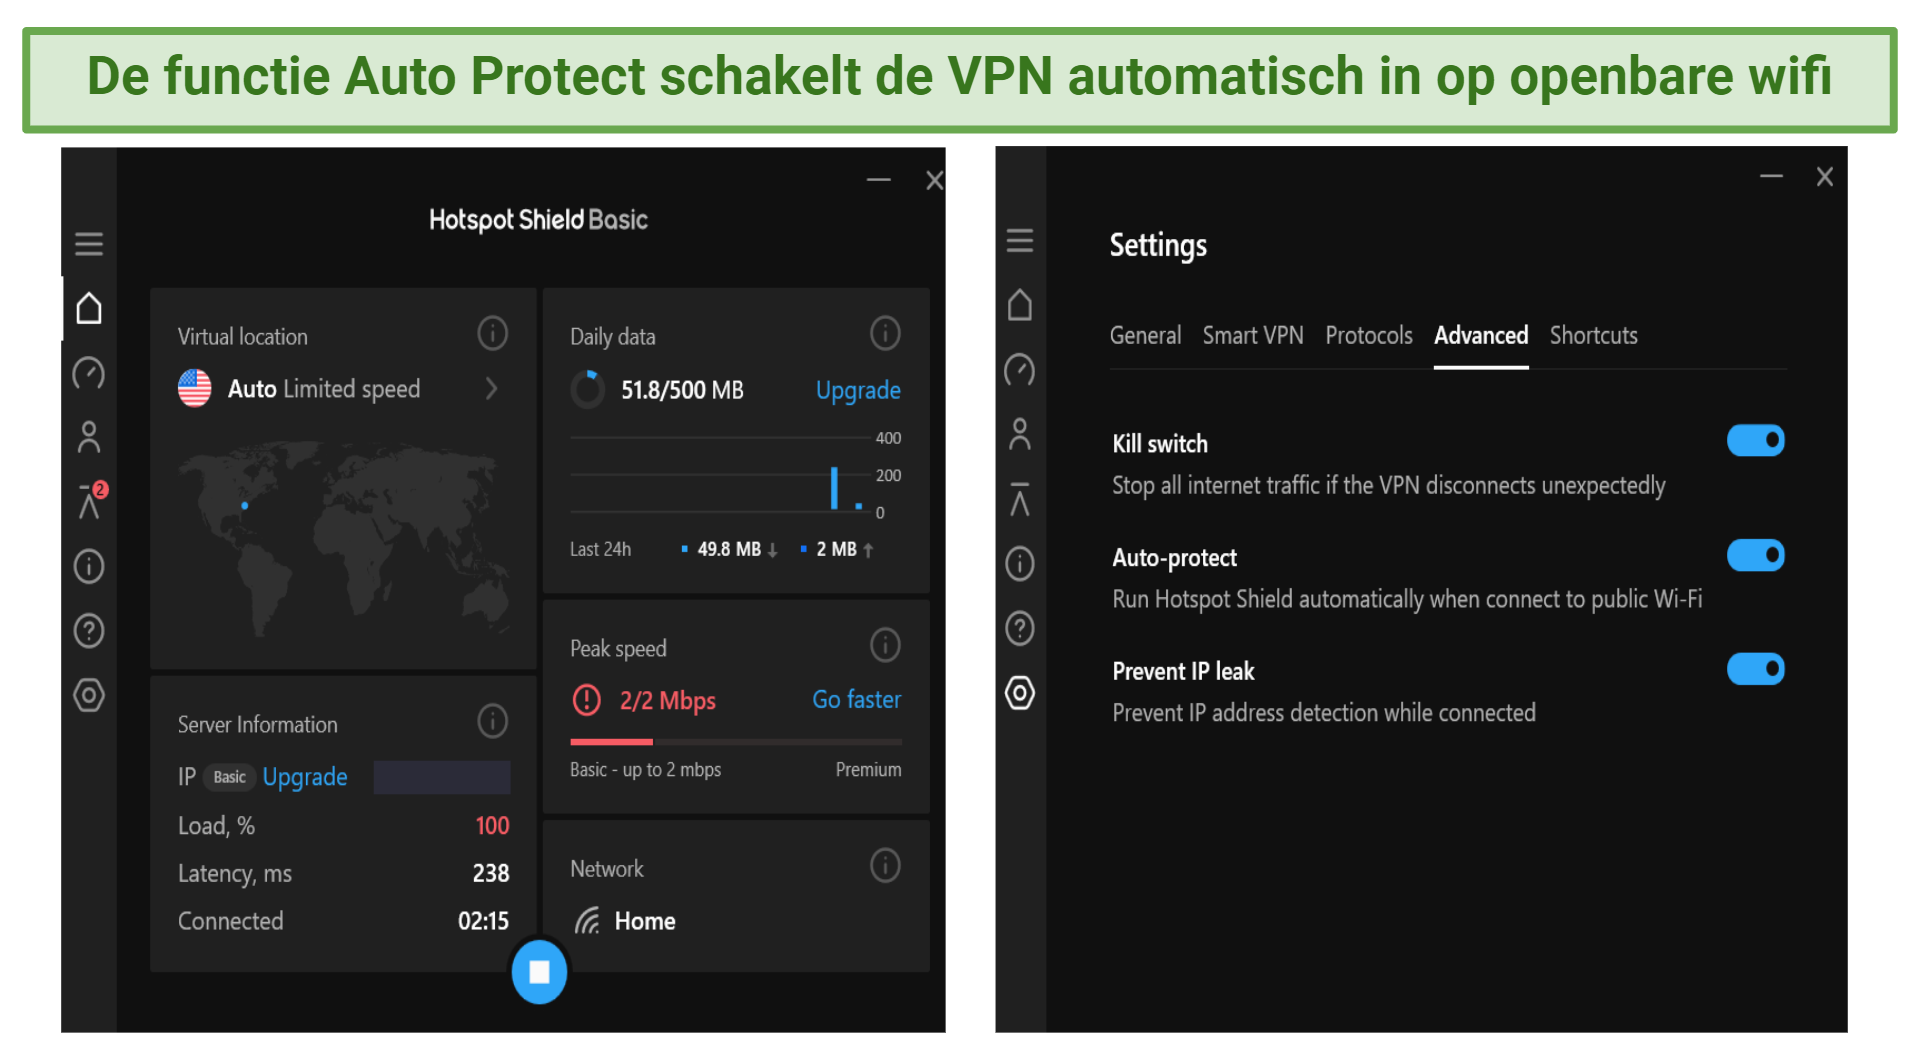 Screenshot showing the interface and features of Hotspot Shield's free version